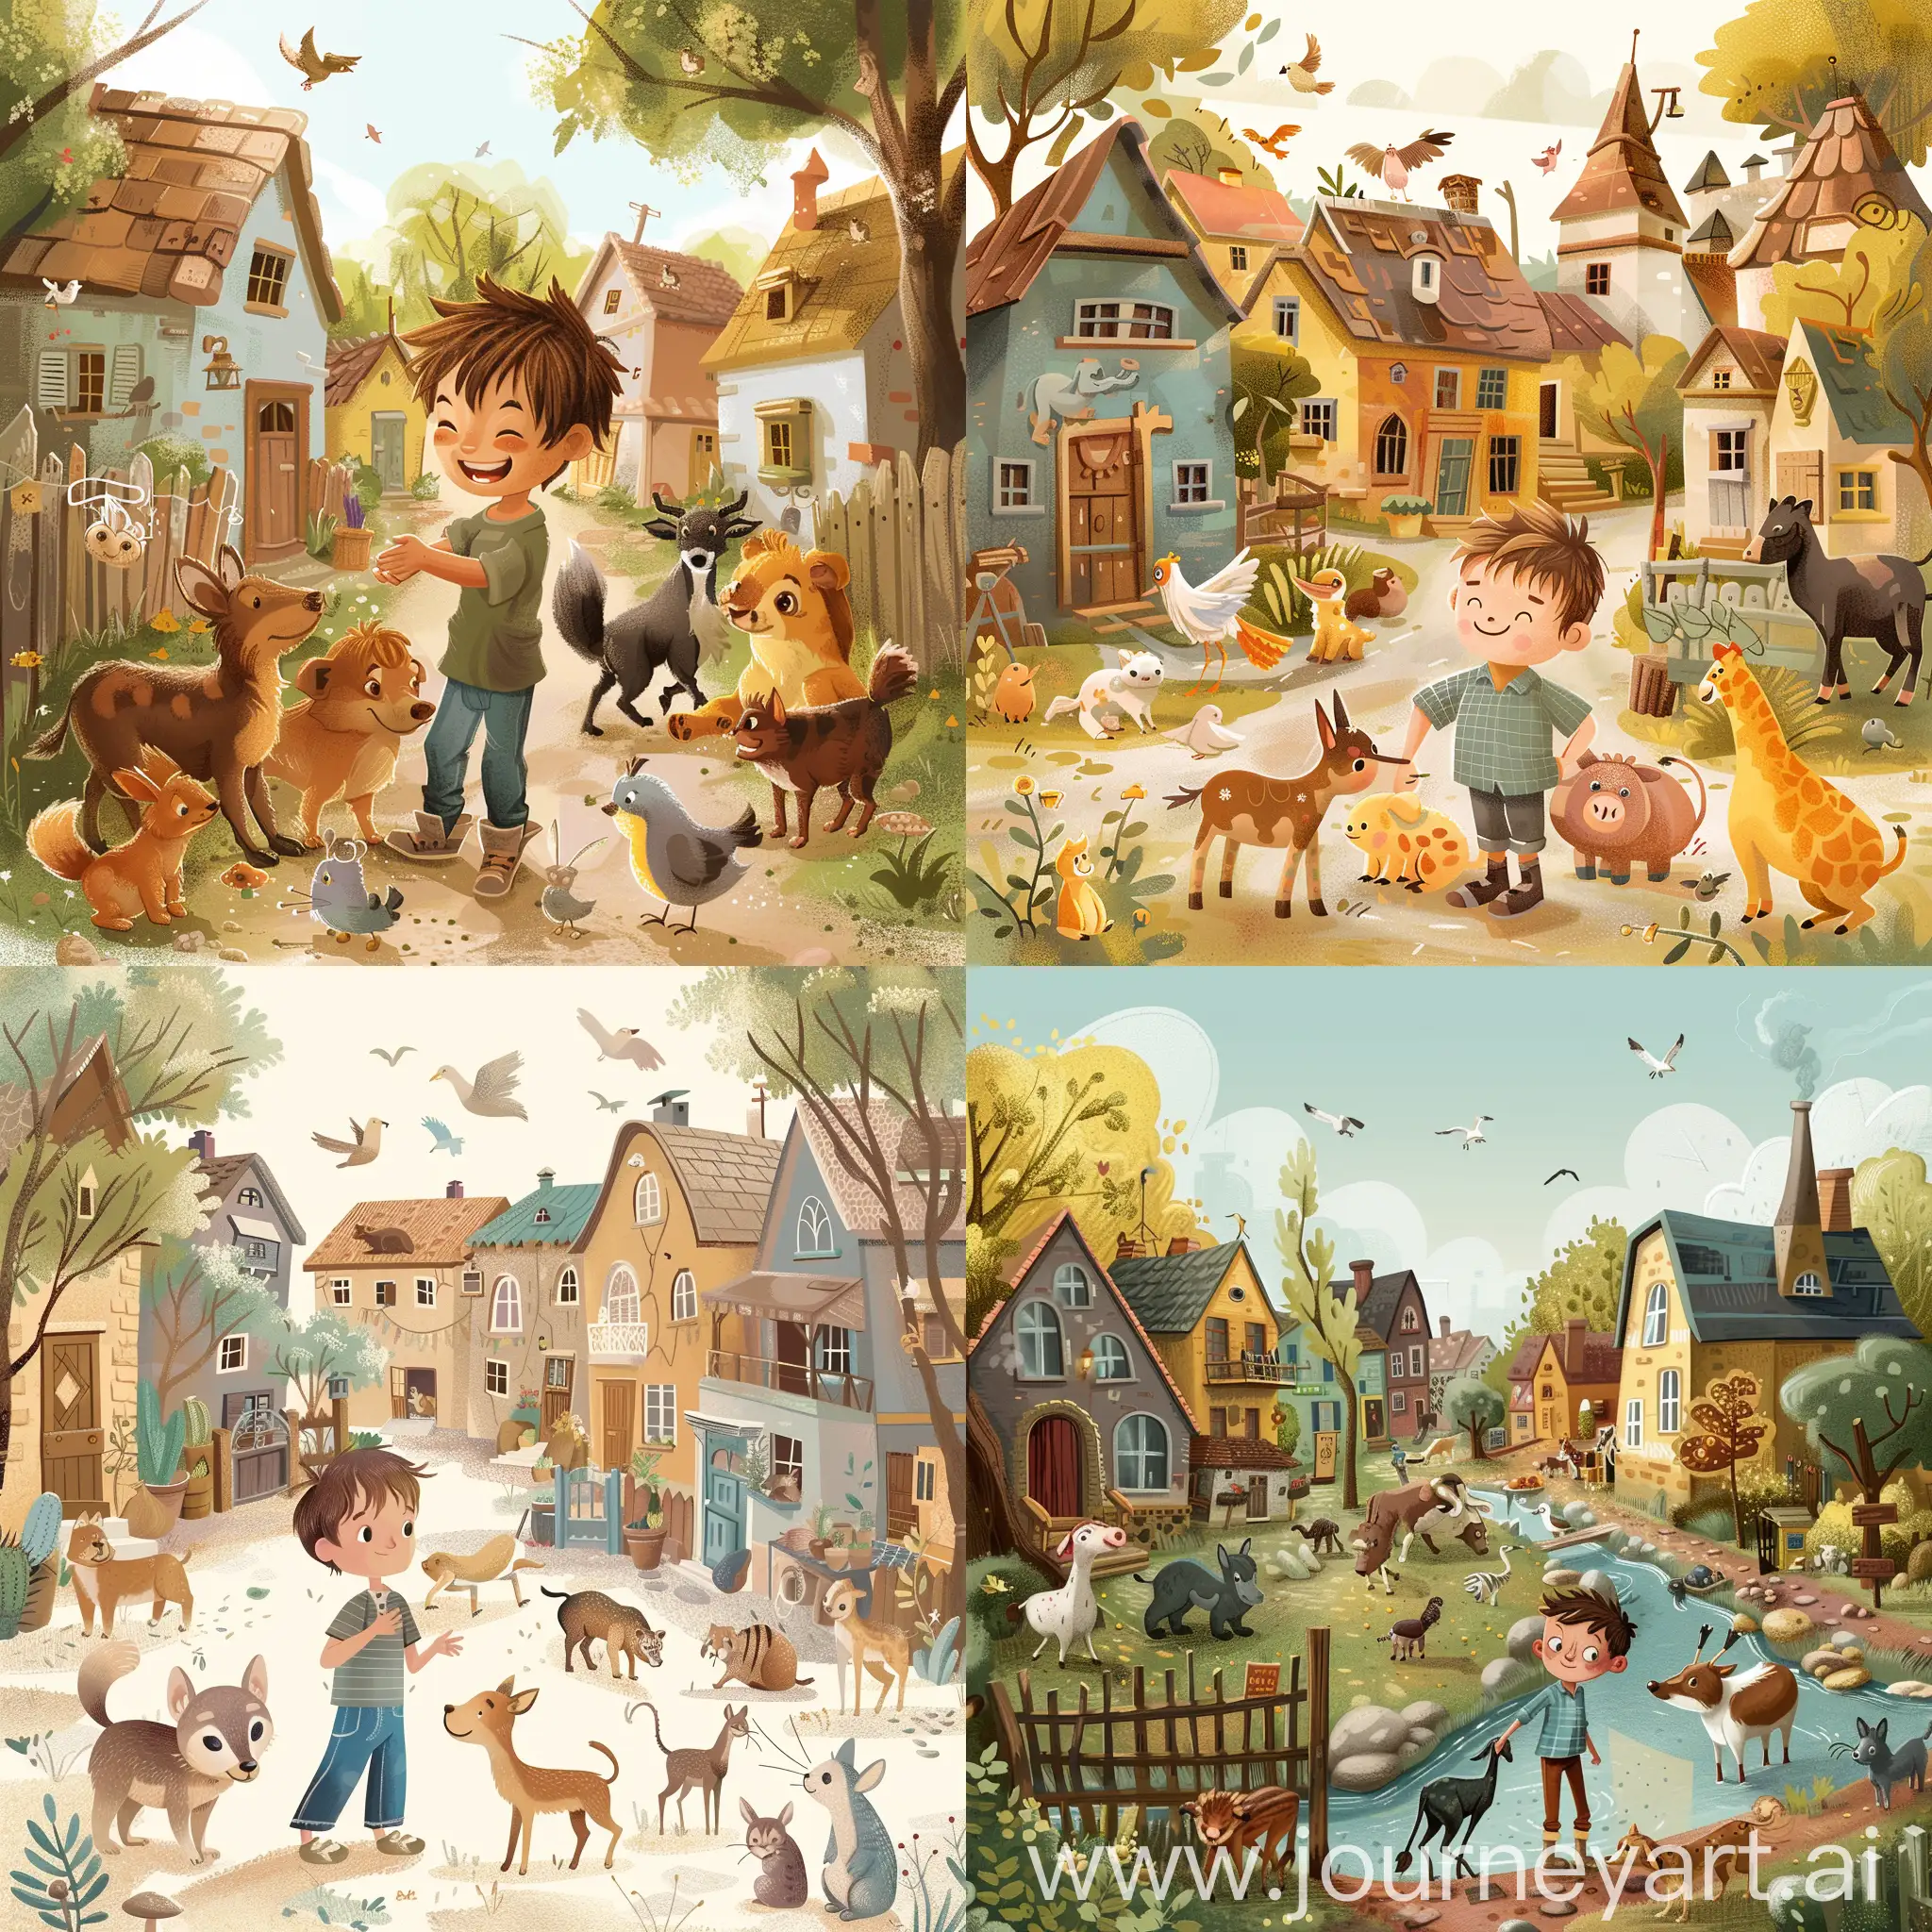 Boy-Living-with-Animals-in-a-Town-Childrens-Book-Illustration-Style